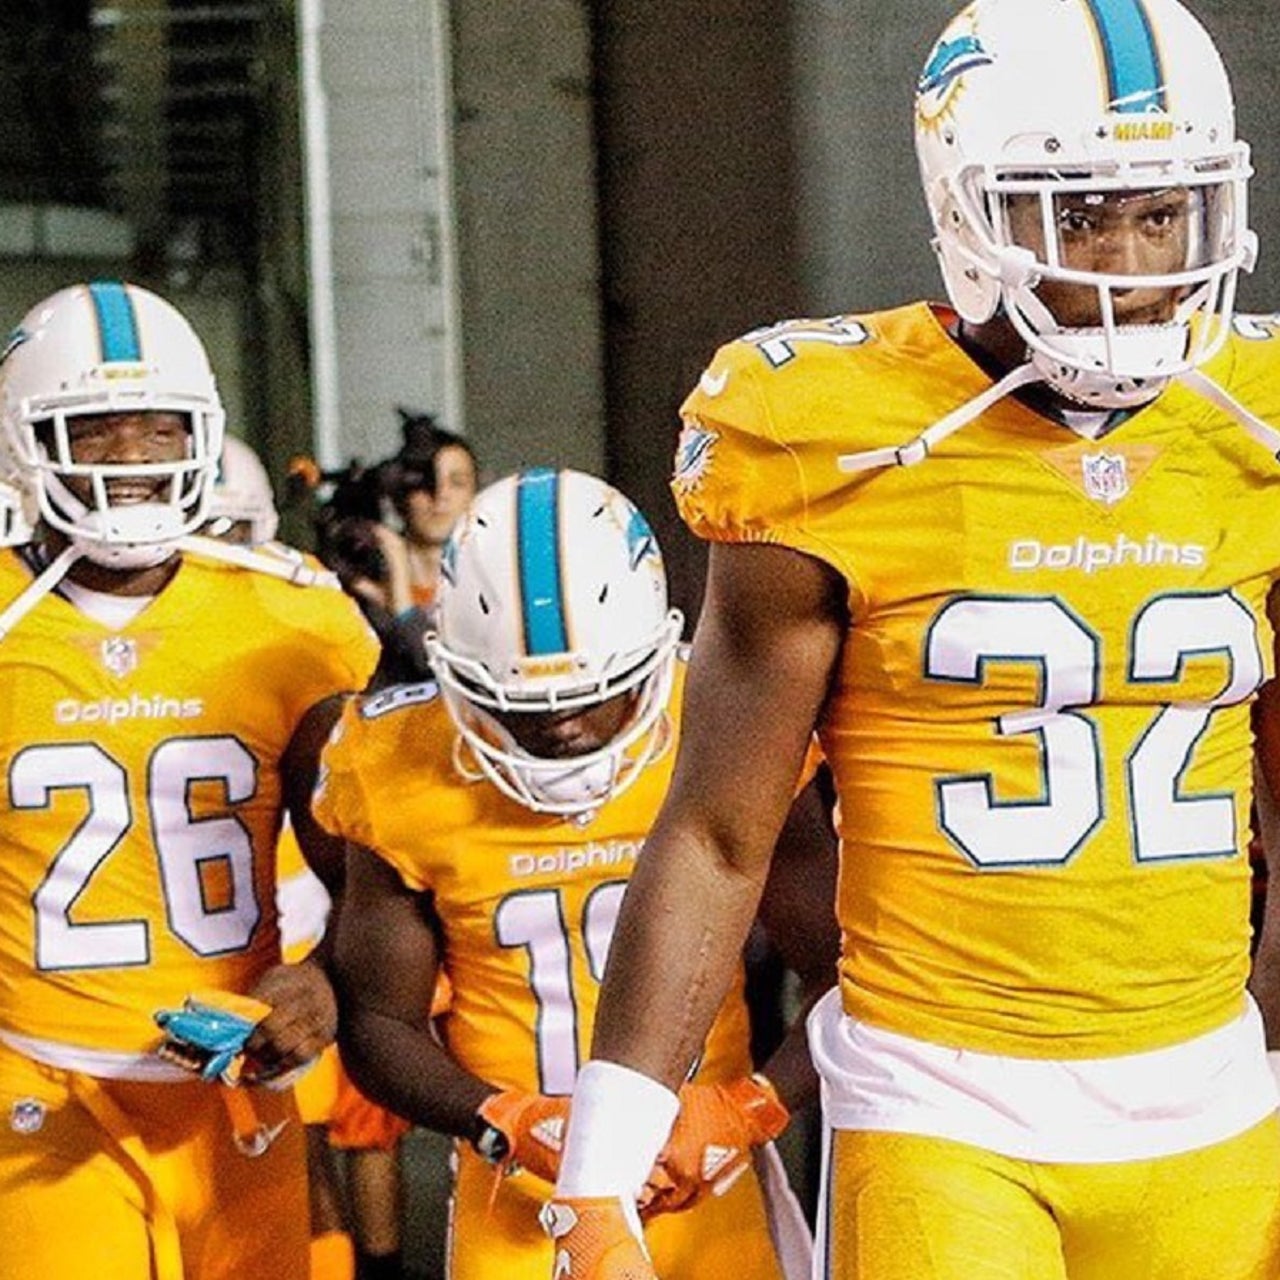 Color rush? Dolphins' awful uniforms look more like Orange Crush